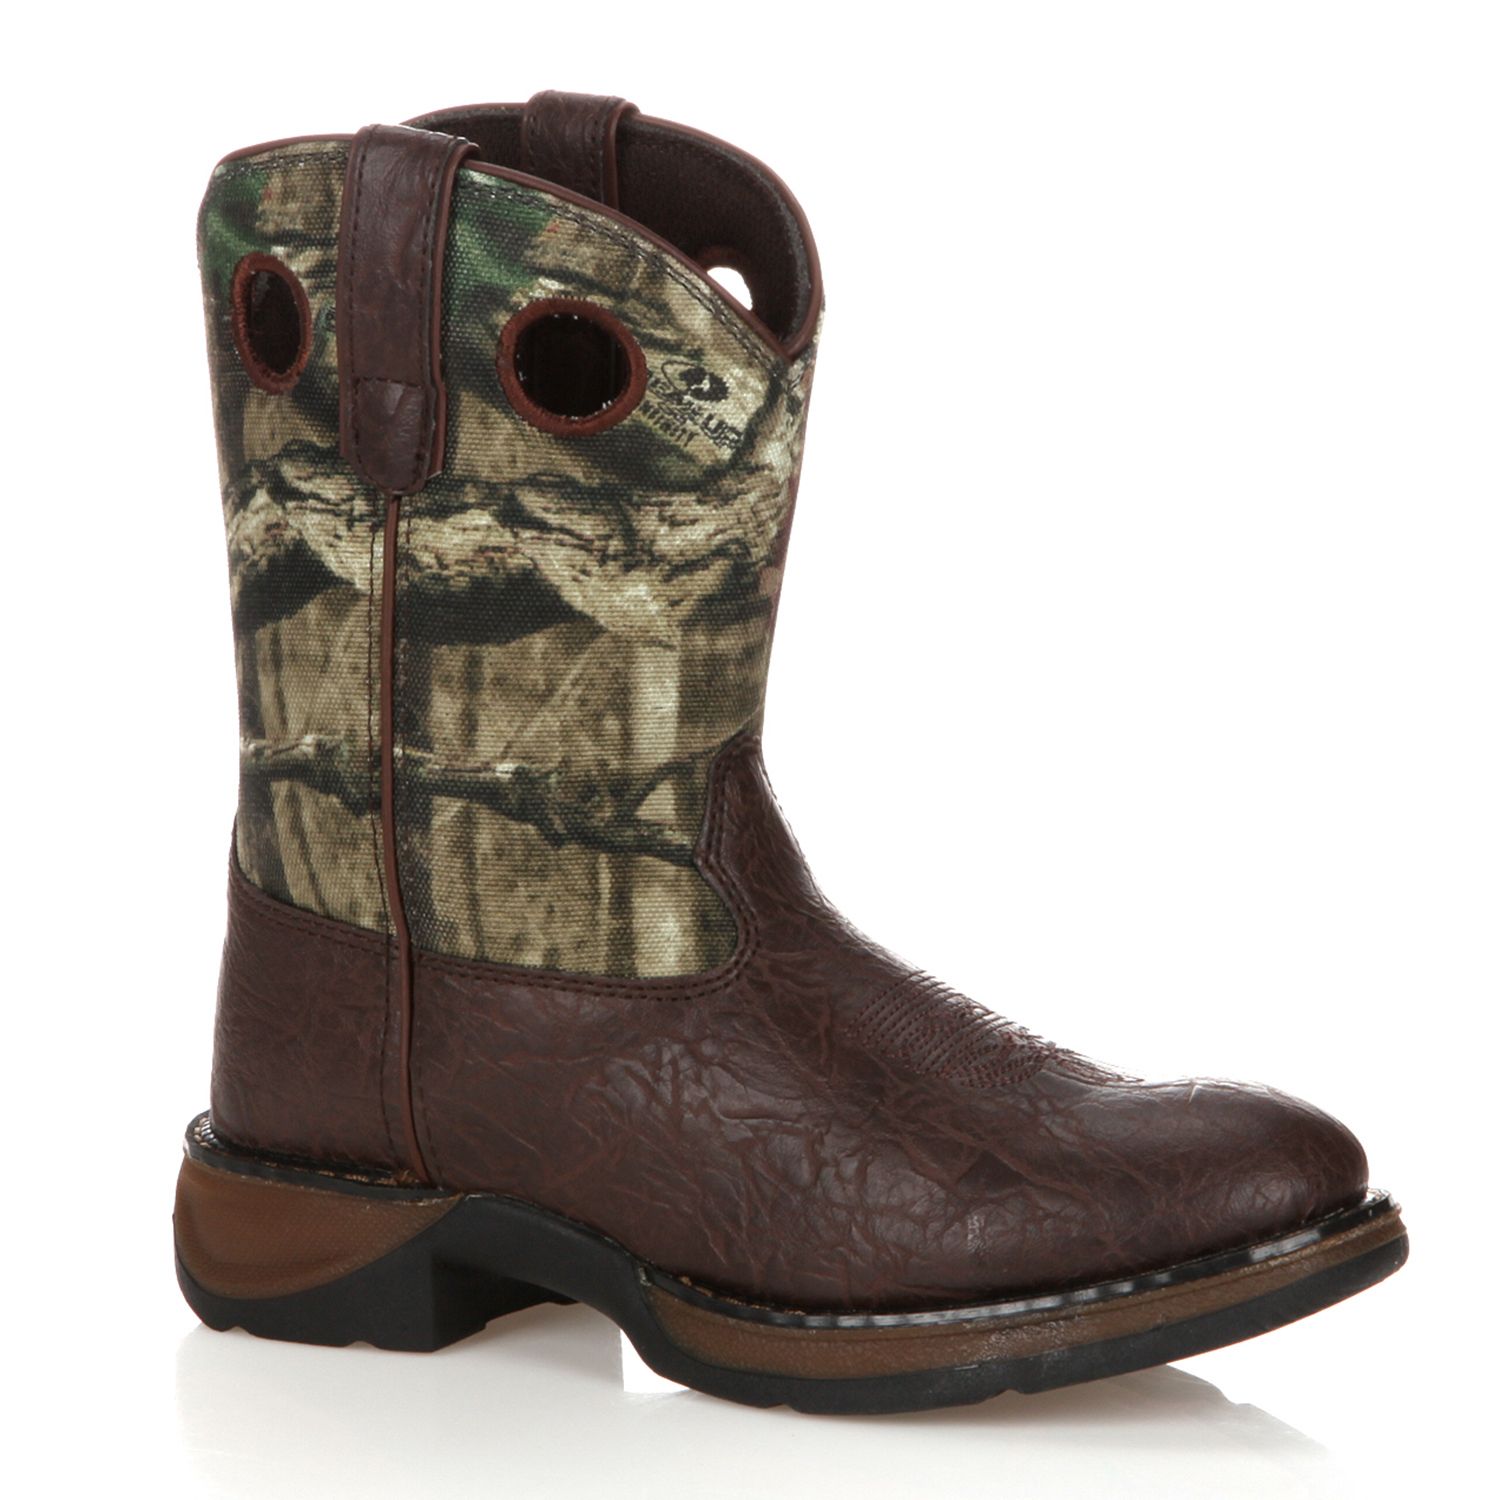 Image for Durango Lil Boys' 8-in. Mossy Oak Break-Up Western Boots at Kohl's.